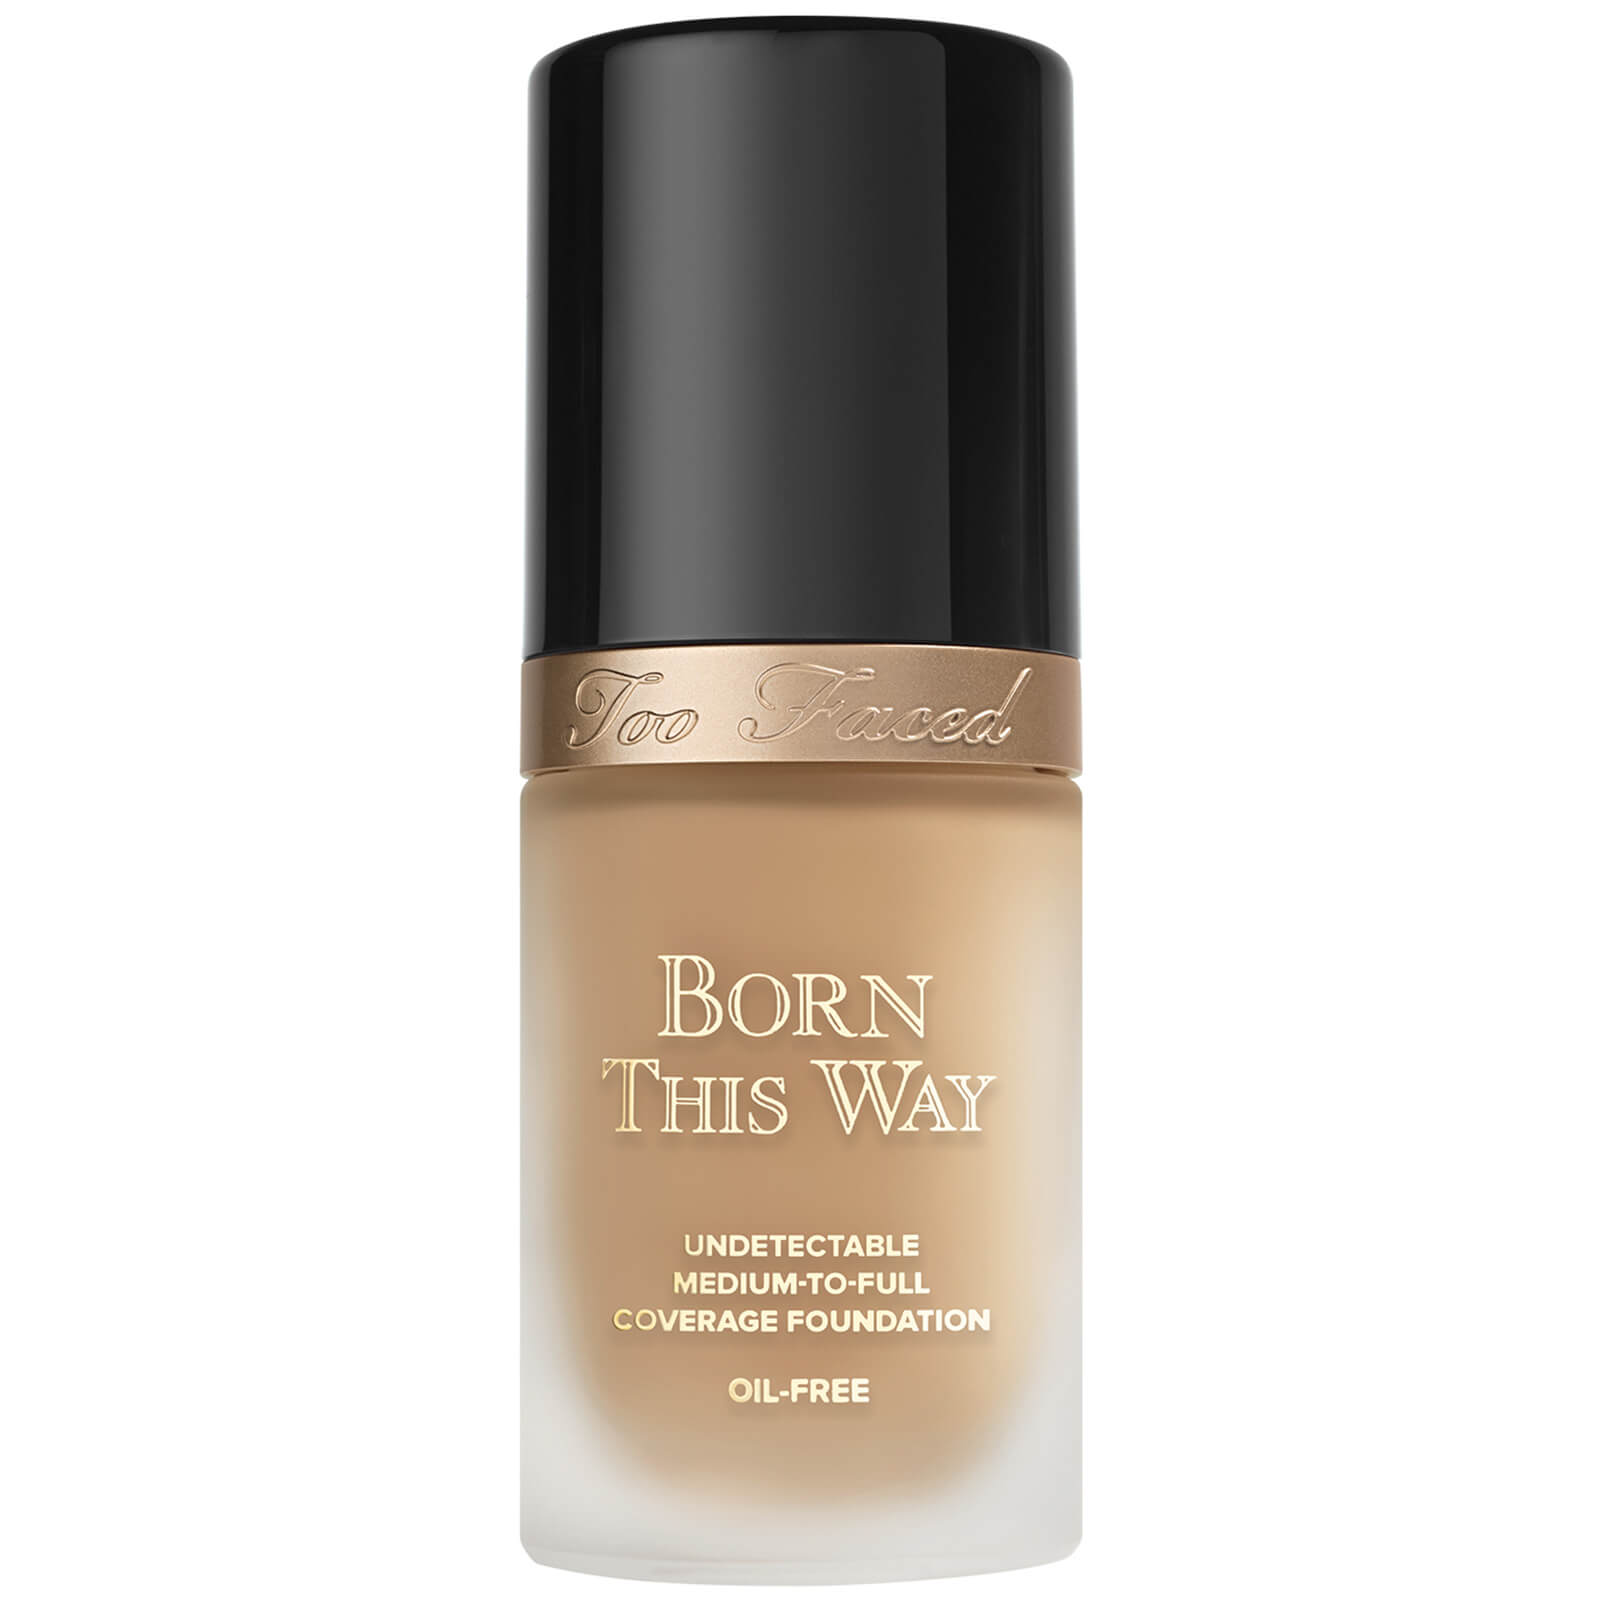 Photos - Foundation & Concealer Too Faced Born This Way Foundation 30ml  - Warm Beige (Various Shades)